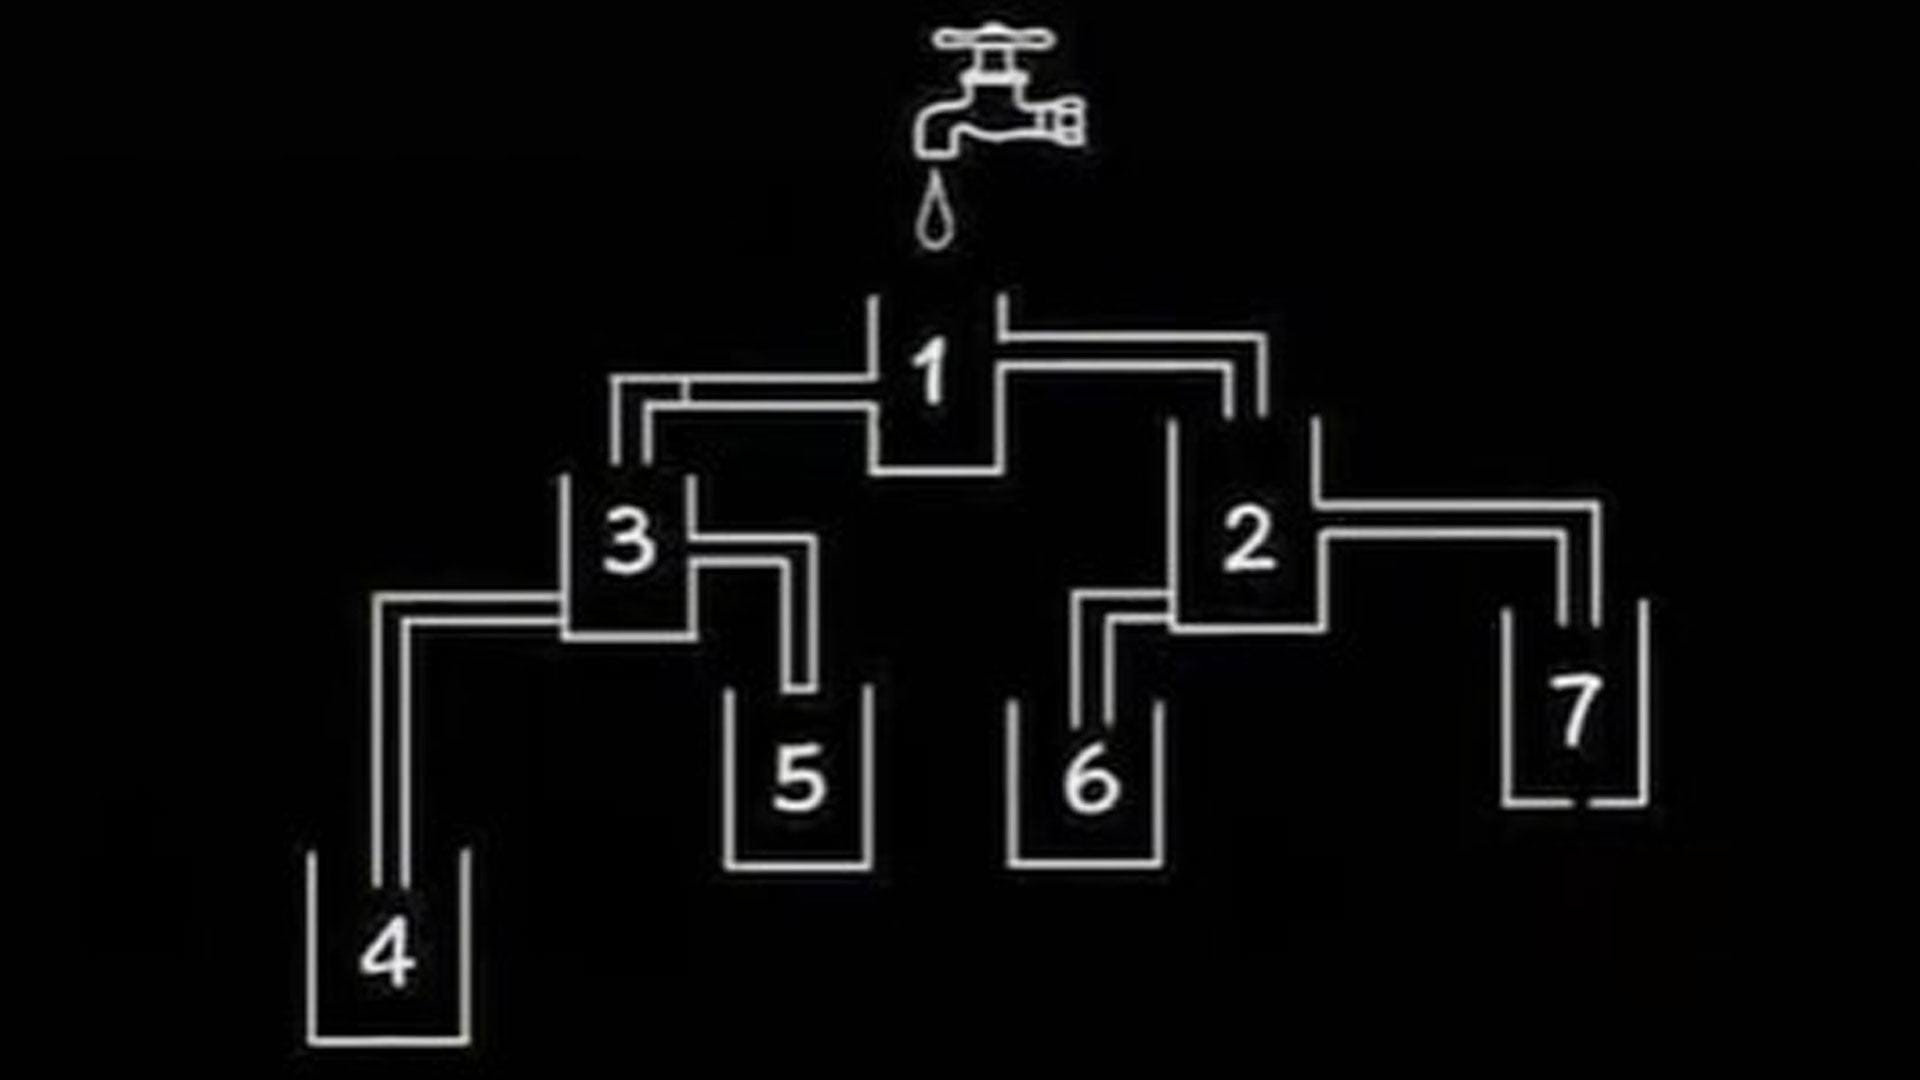 You could have a top IQ if you can work out which cup will fill up first in this puzzle within 20 seconds